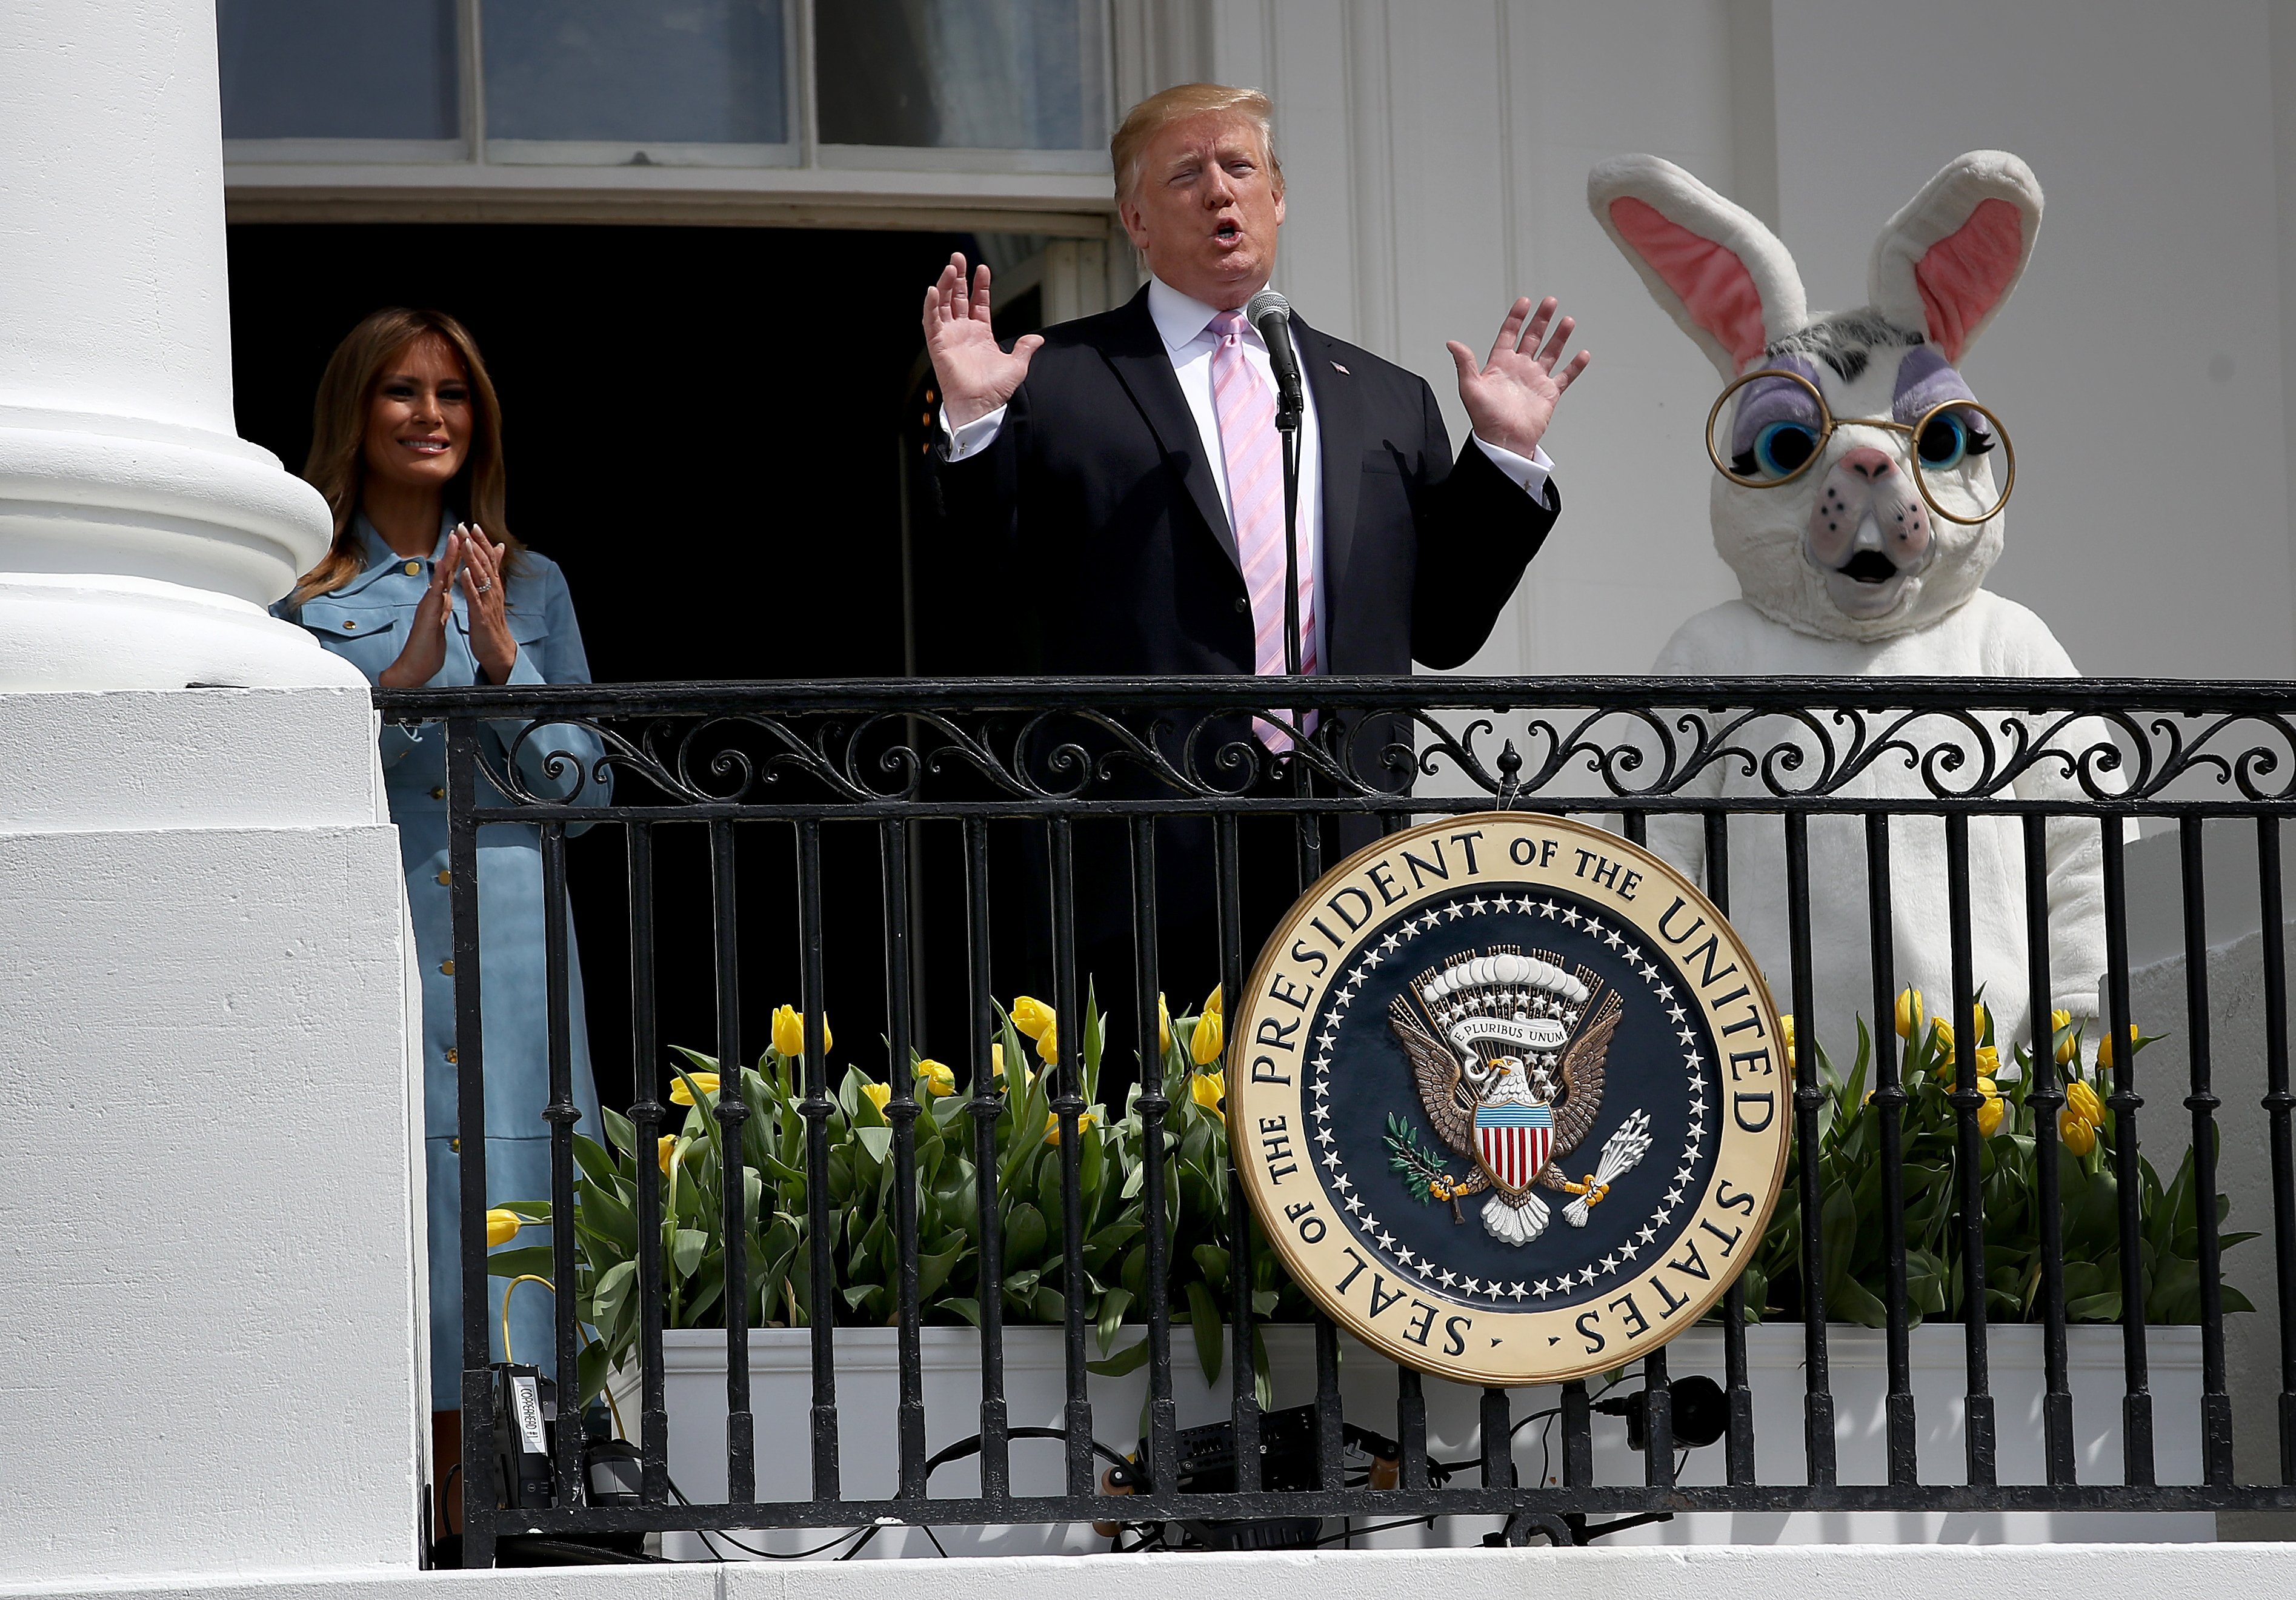 Donald Trump delivering the welcoming speech to the 141st Easter Egg Roll at the White House | Photo: Getty Images